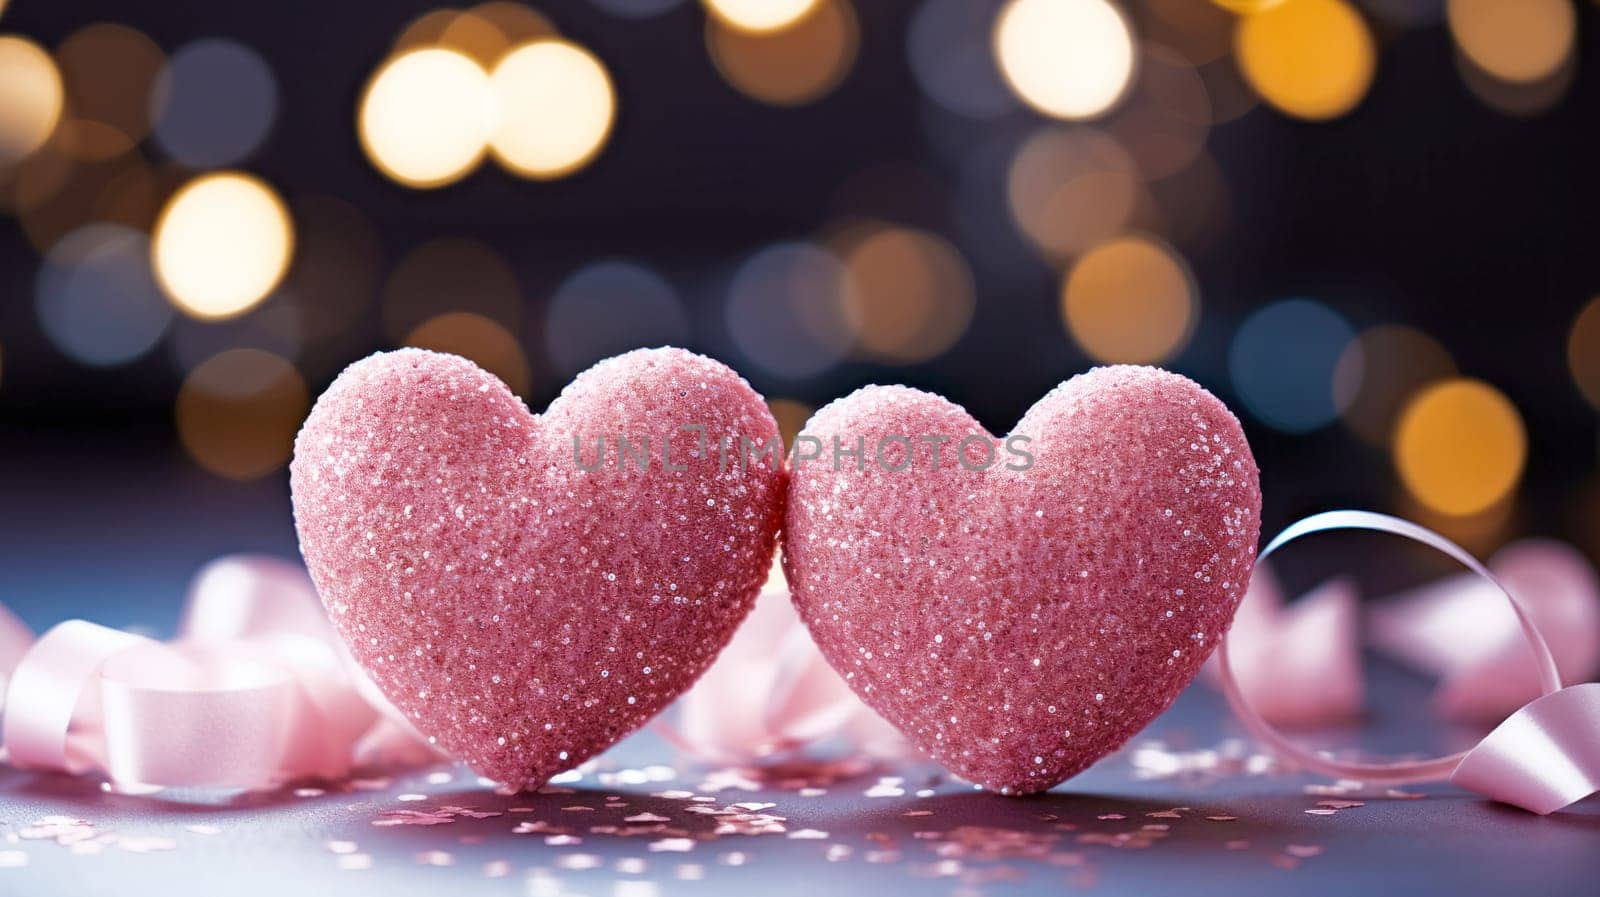 Two pink hearts as a symbol of love.Valentine's day background by NataliPopova